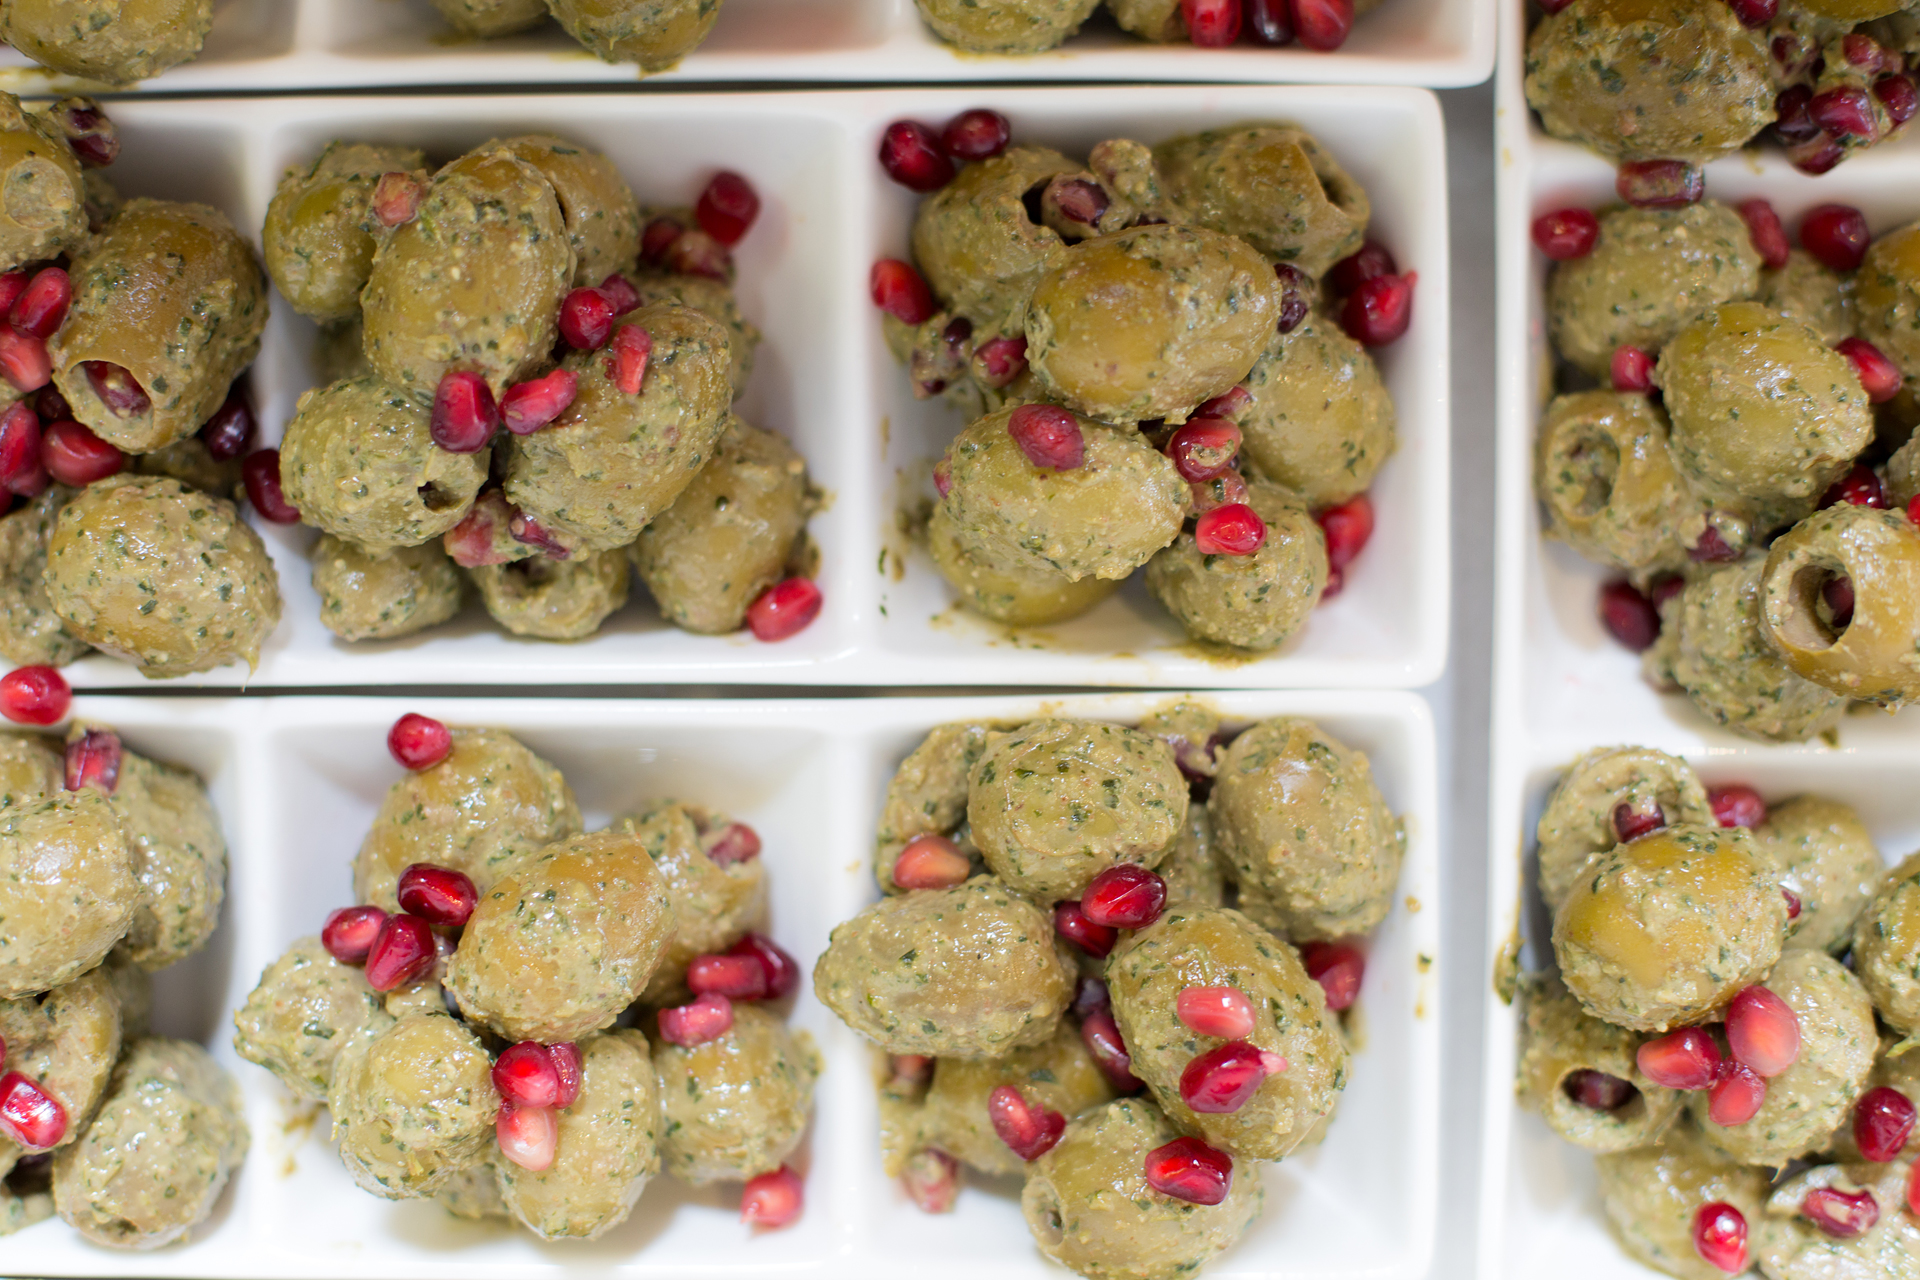 Zeitun Parvardeh are green olives marinated with pomegranate molasses, walnuts and a blend of of herbs.